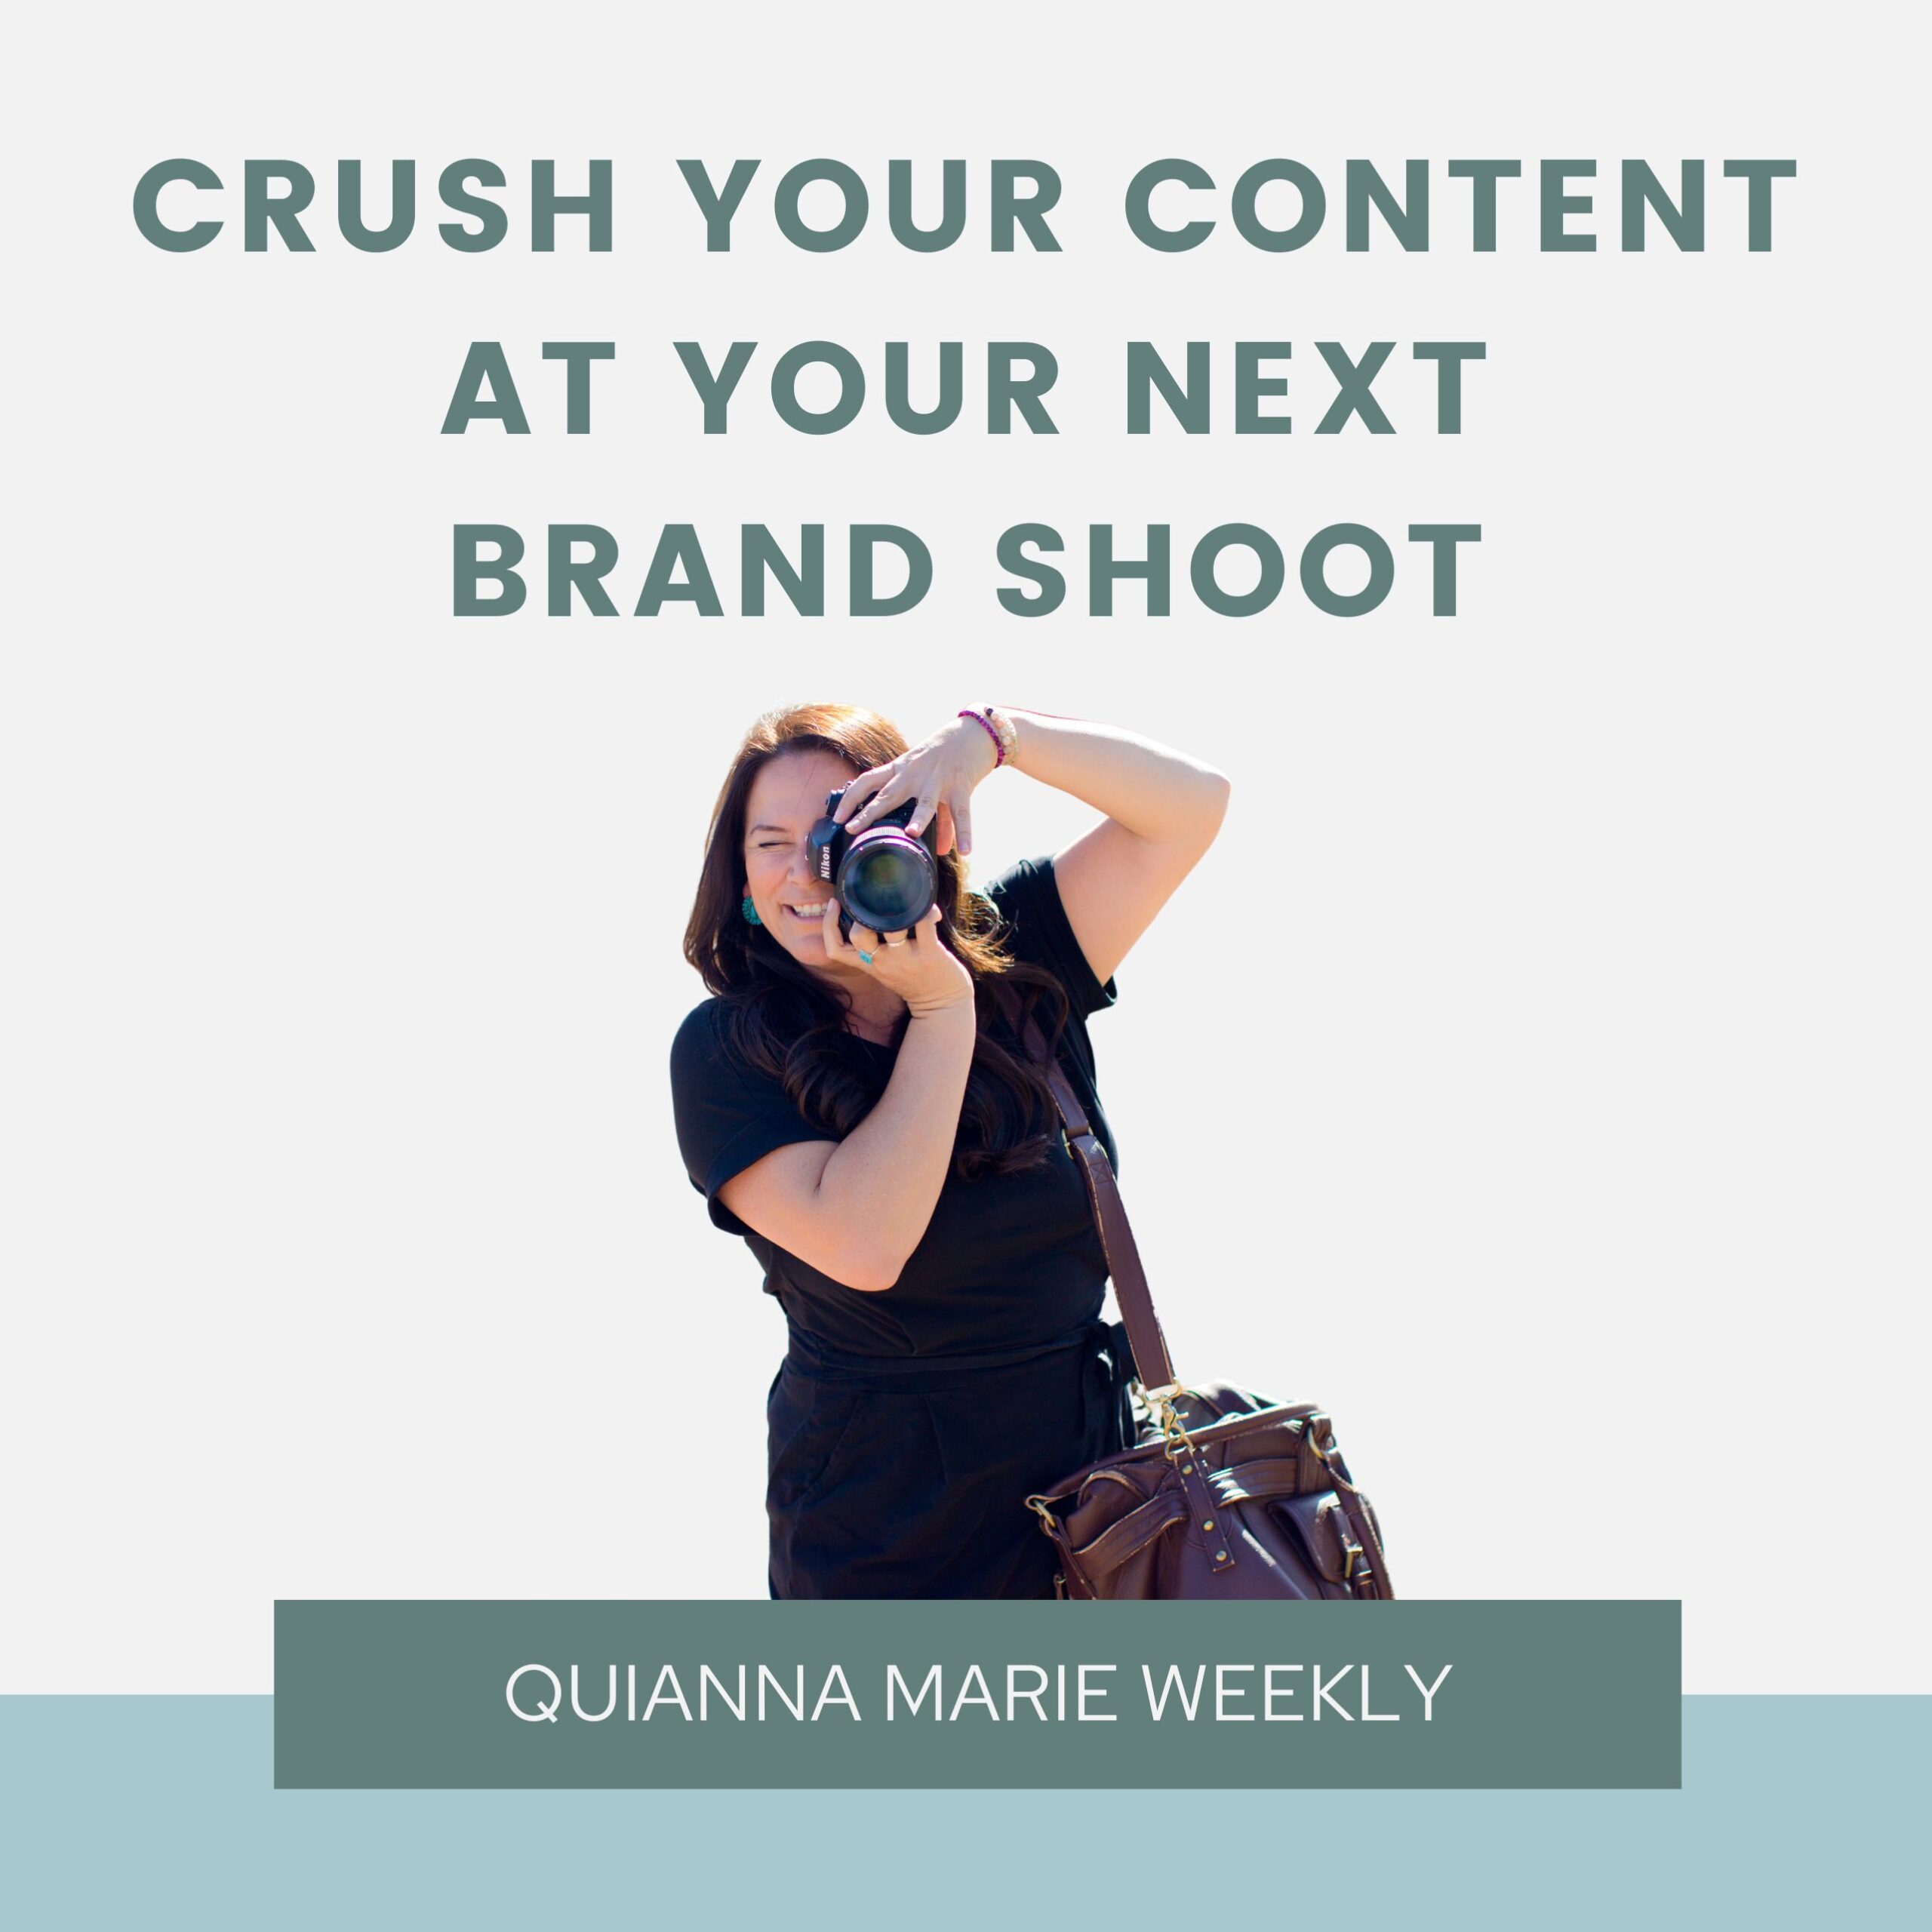 Crush your content at your next brand shoot - Tips for your next photo shoot with Quianna Marie